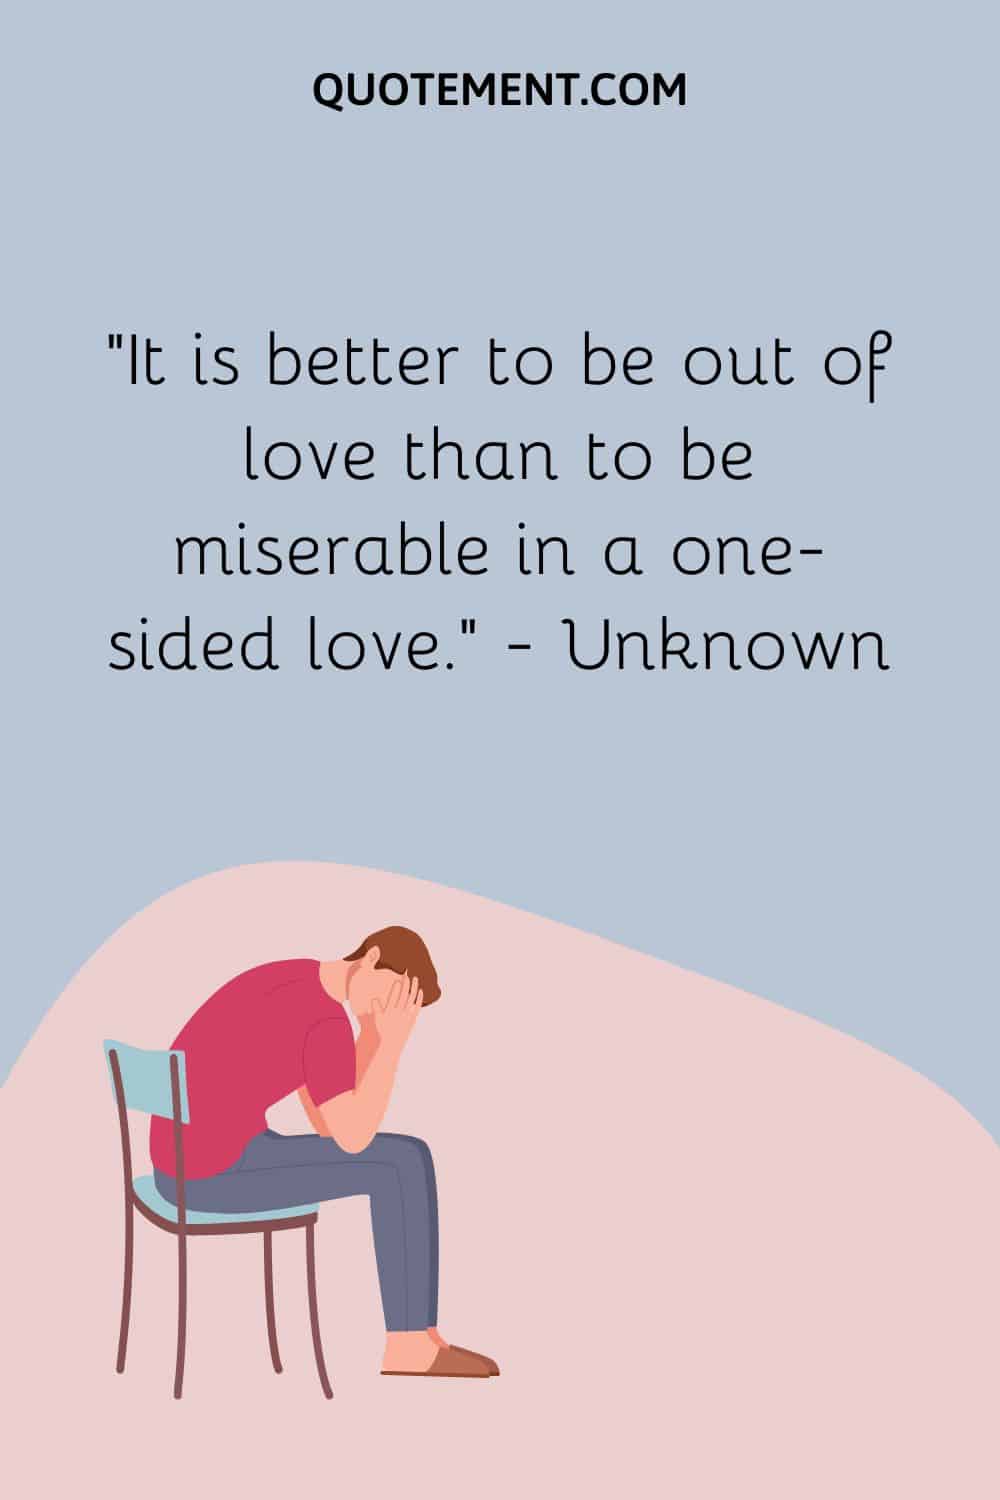 It is better to be out of love than to be miserable in a one-sided love.